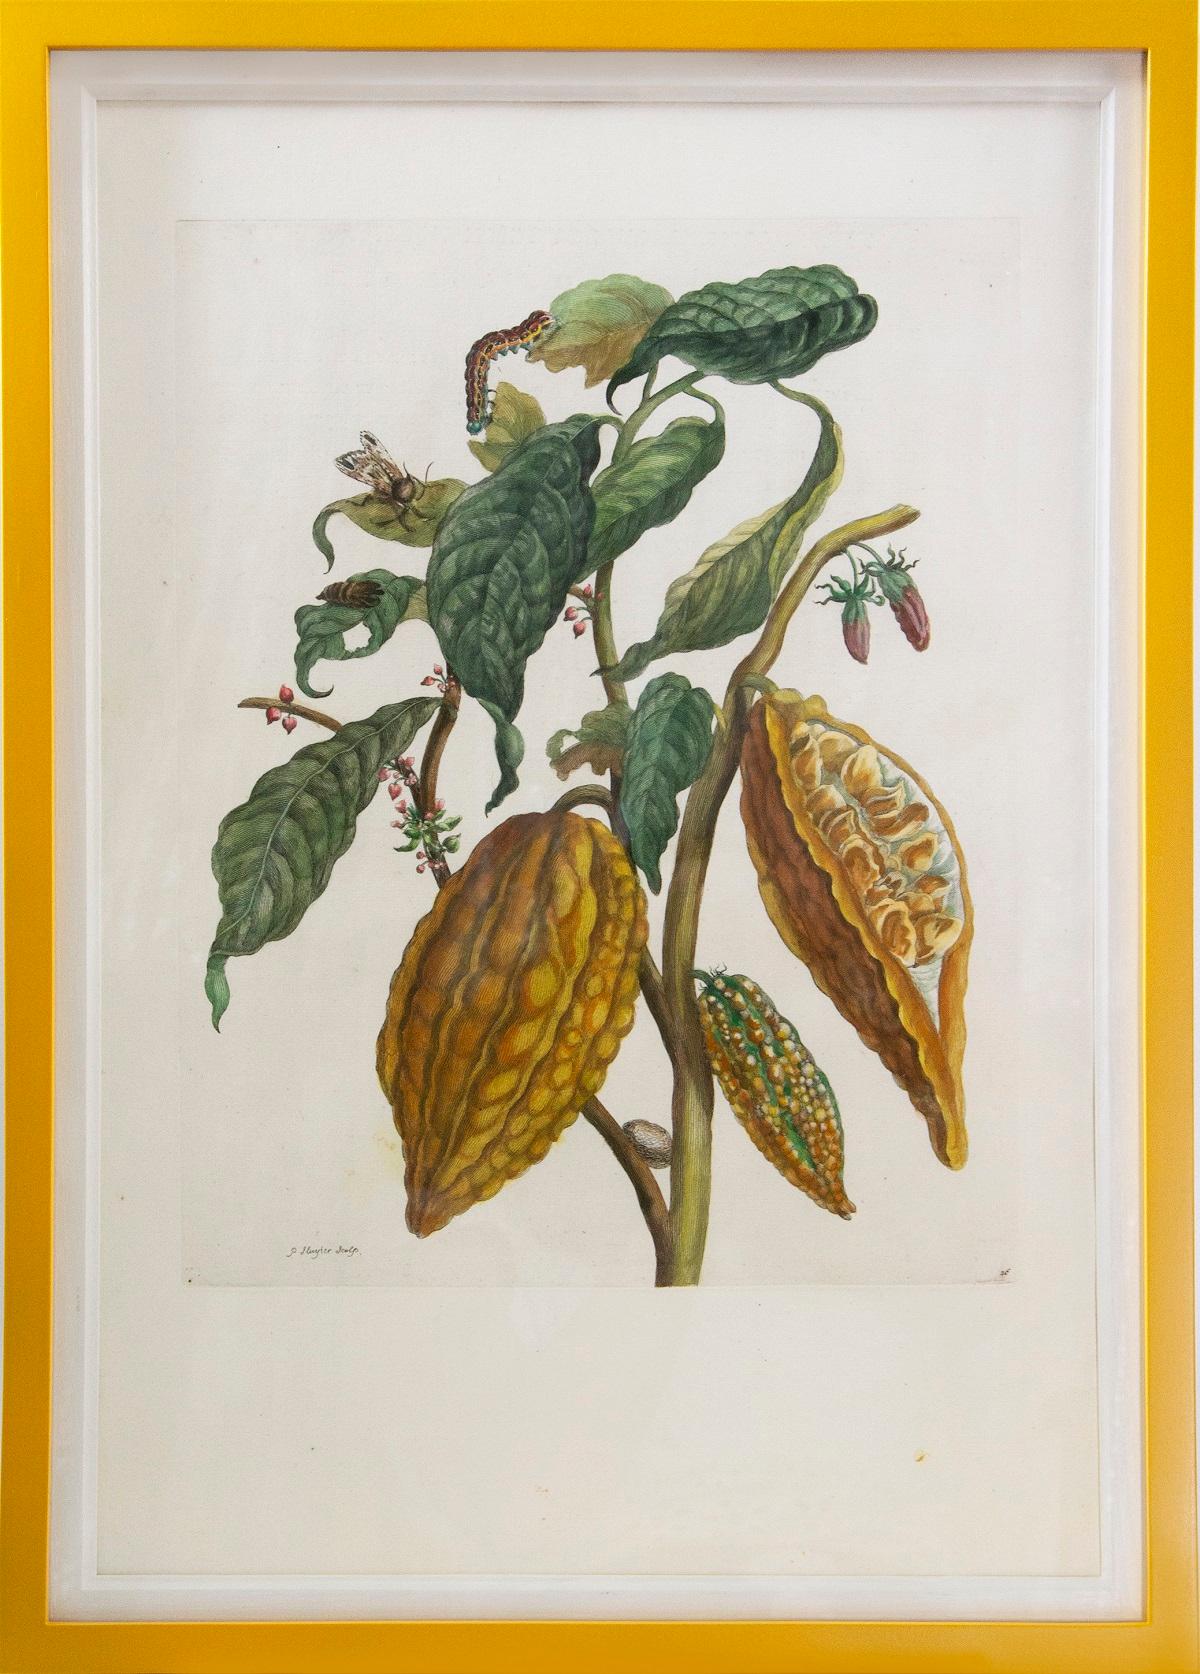 Merian - A Group of Six Flowers, Insects and Fruits.   - Print by Maria Sybilla Merian